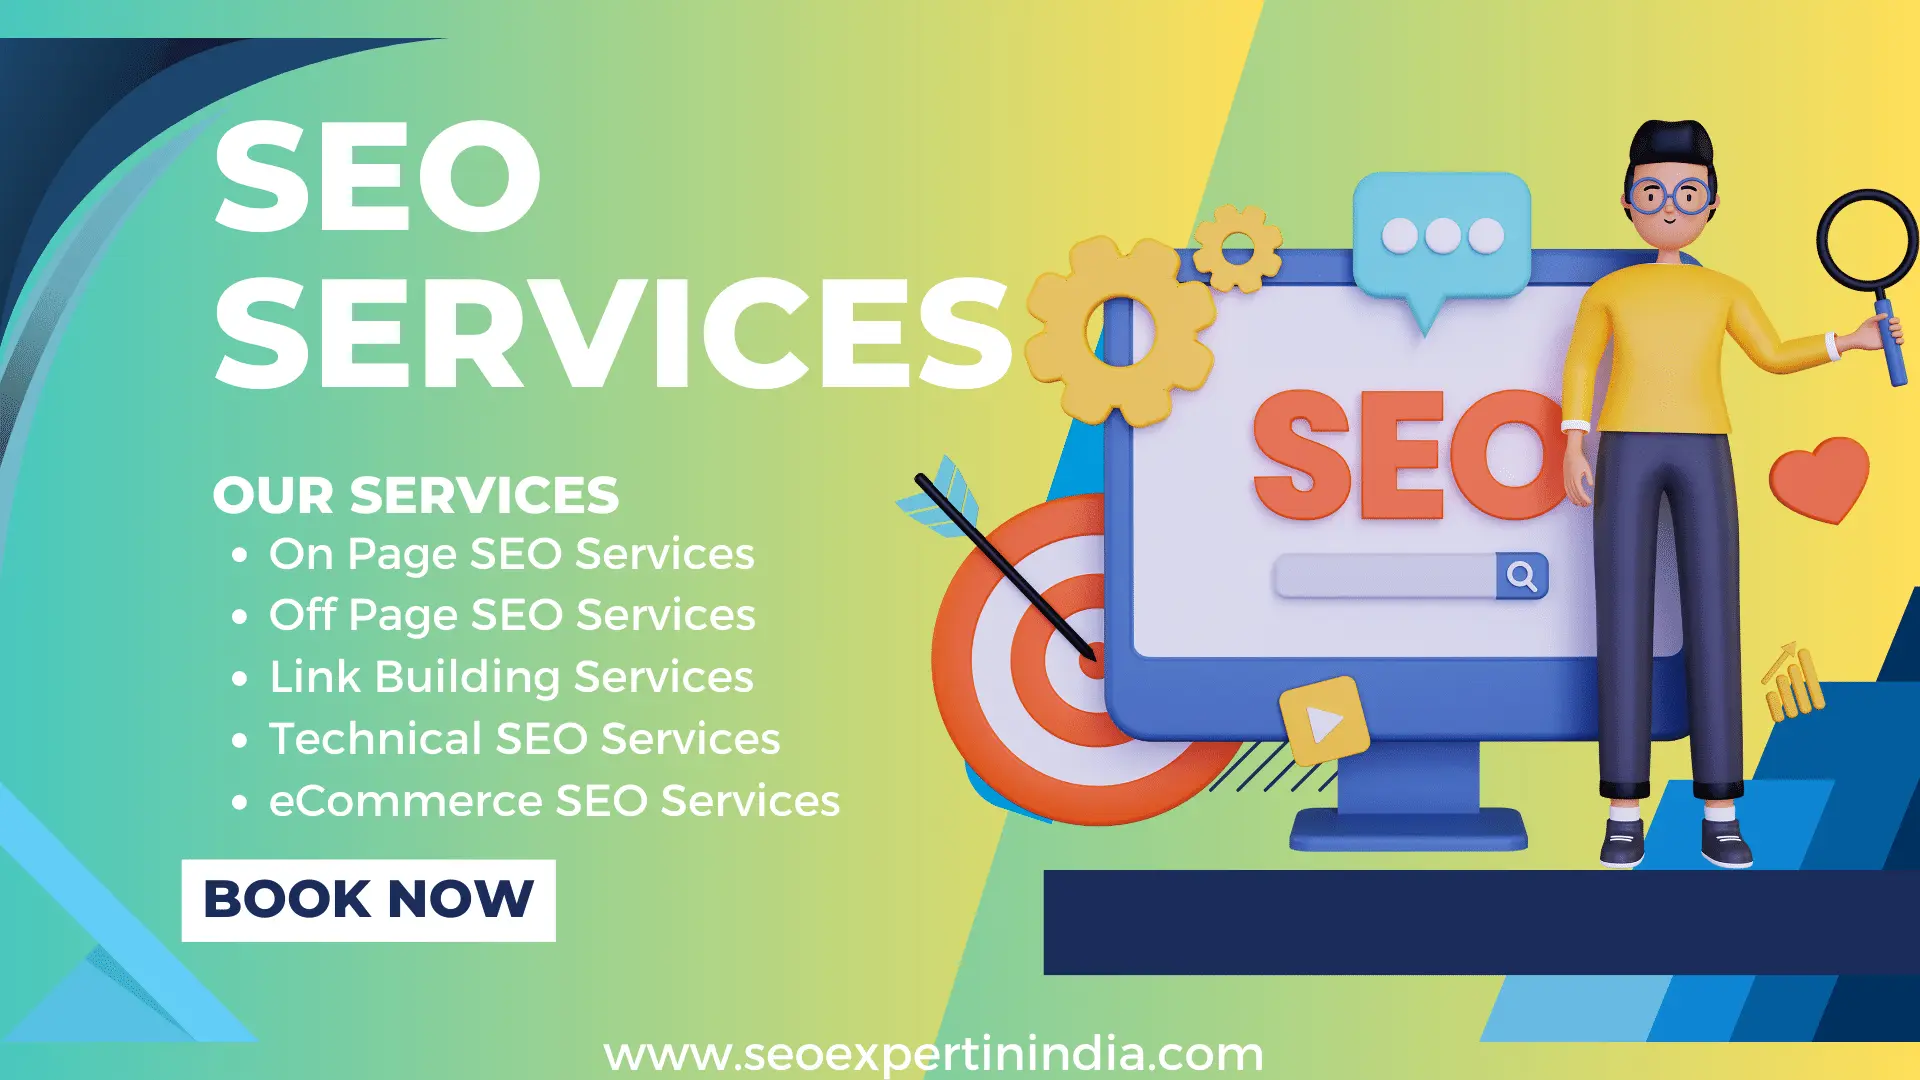 Hire SEO Experts in India